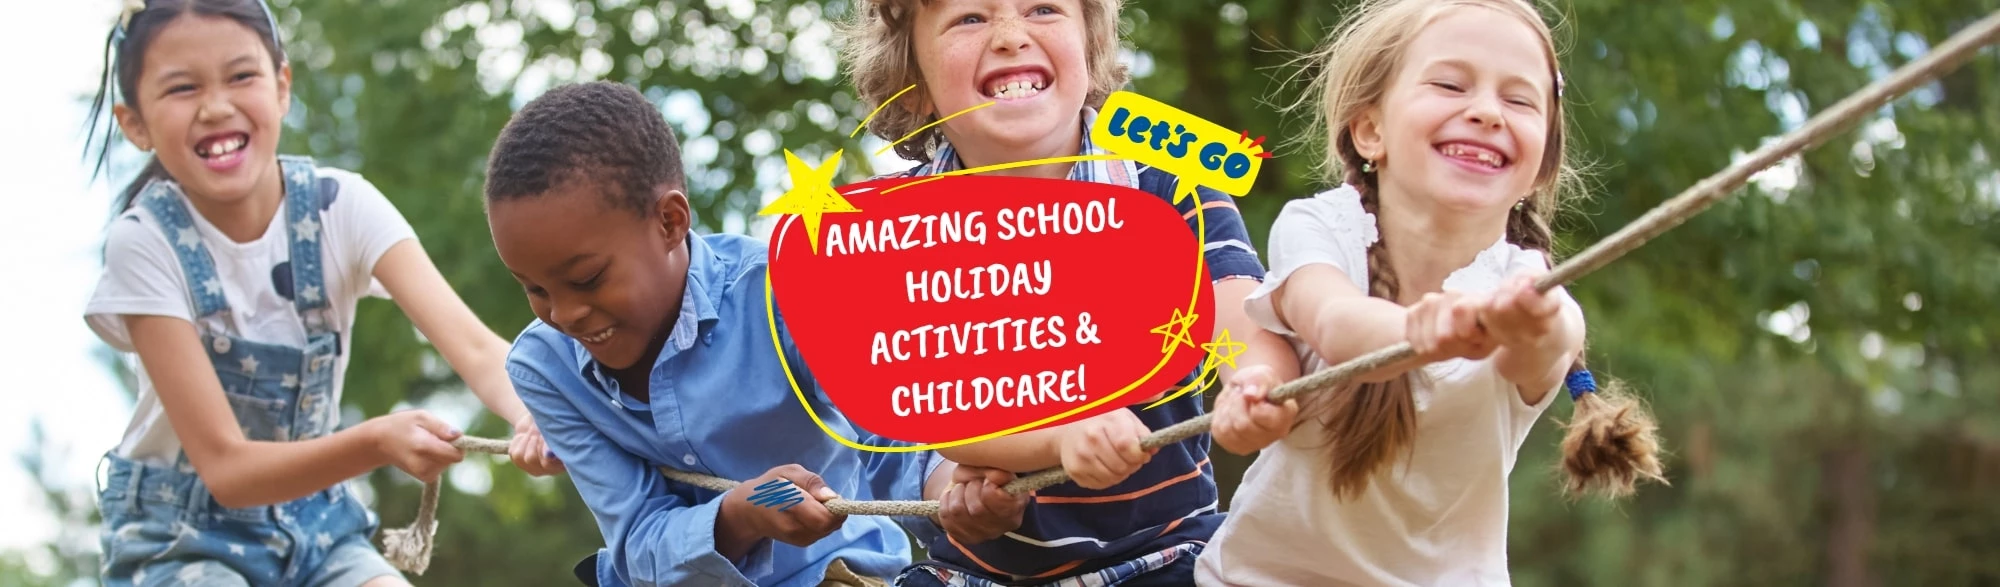 Amazing school holiday activities and childcare